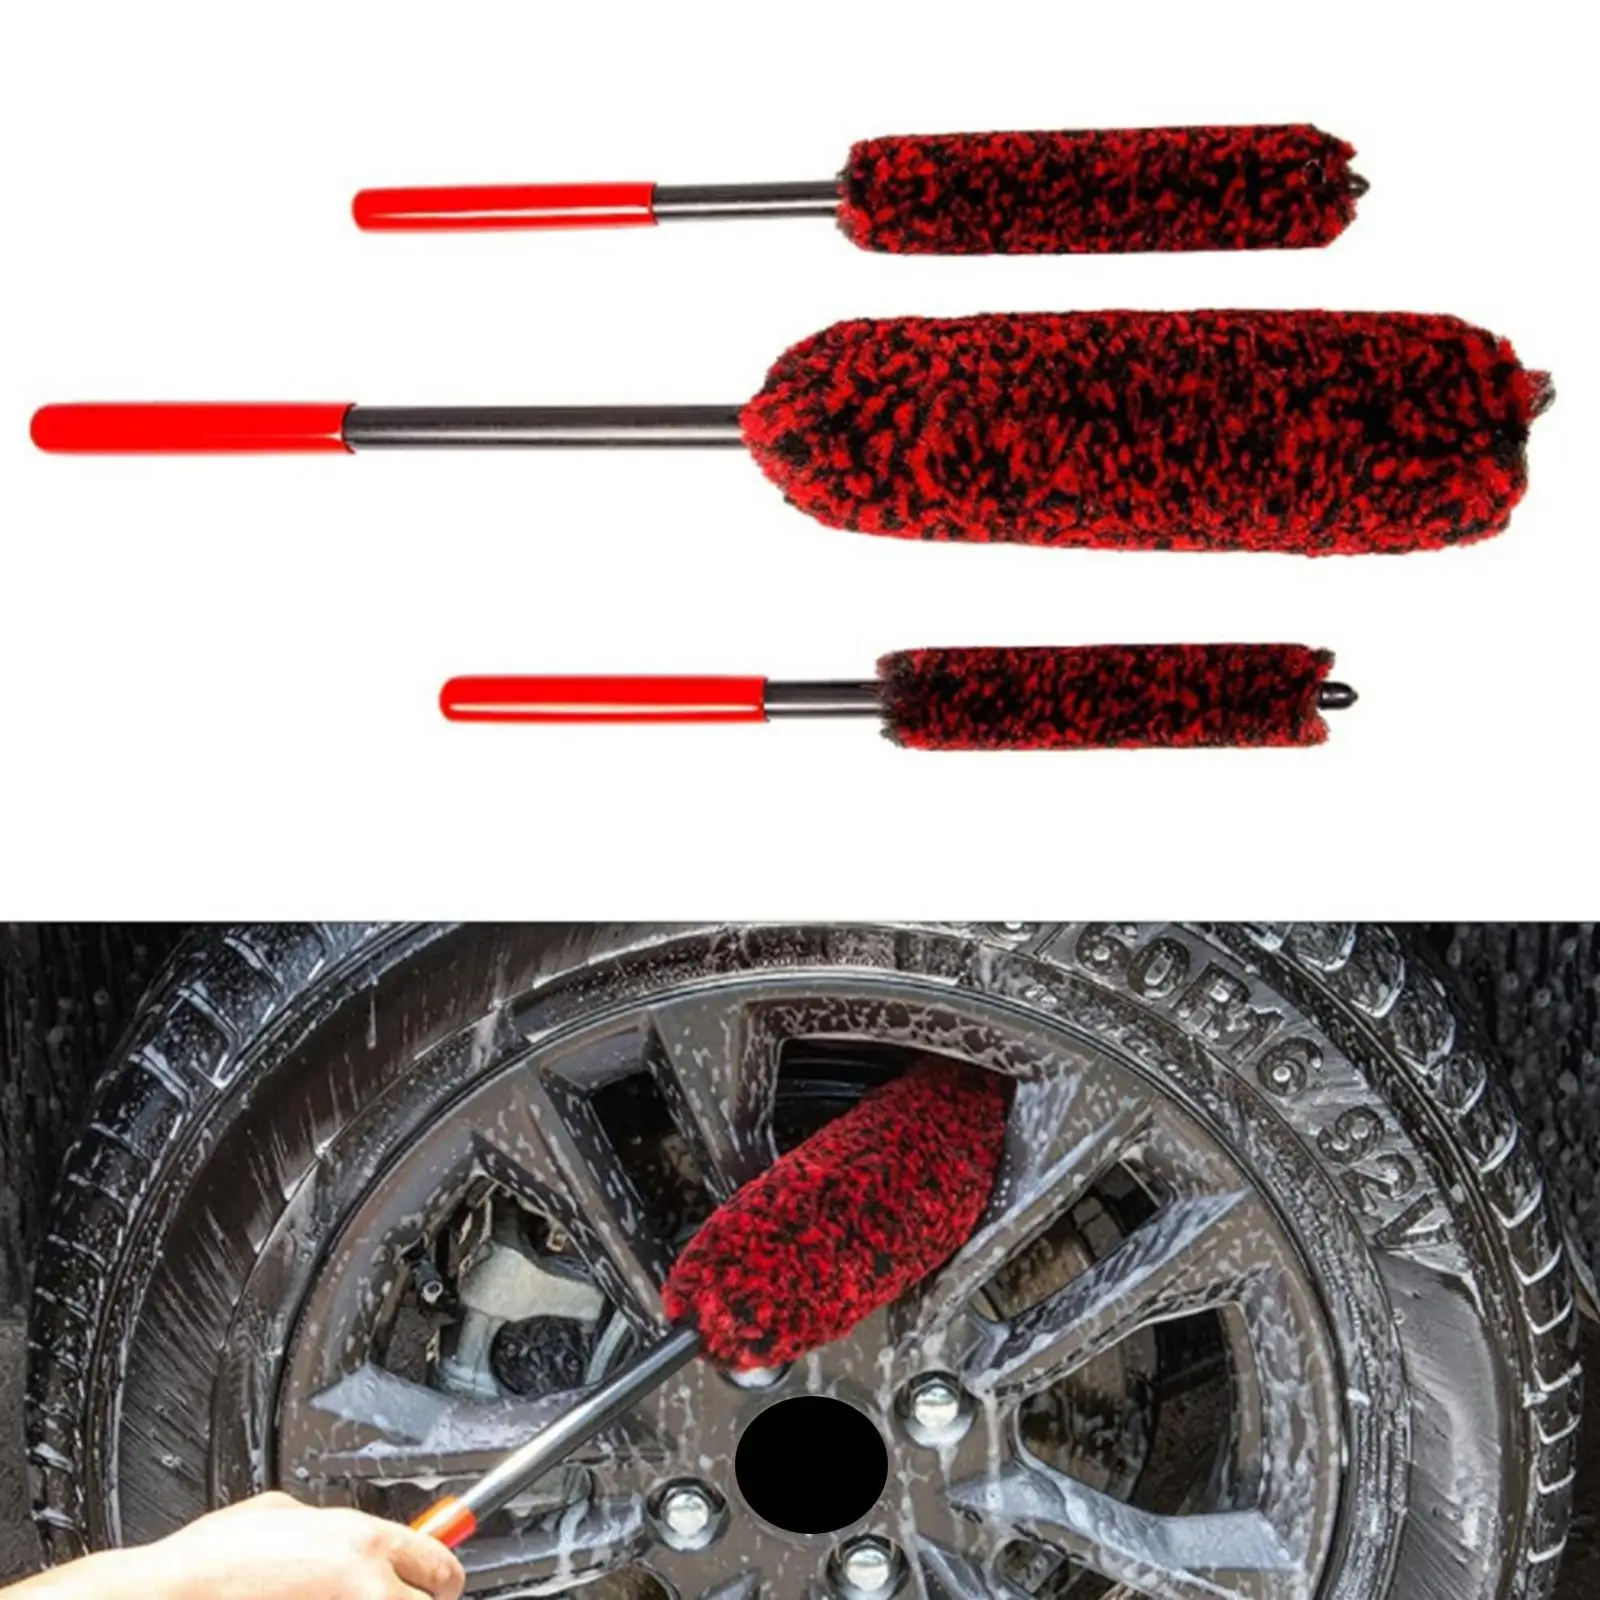 3 Pieces wheel Rim Brush Wash Tool Reusable for Motorcycles RV SUV